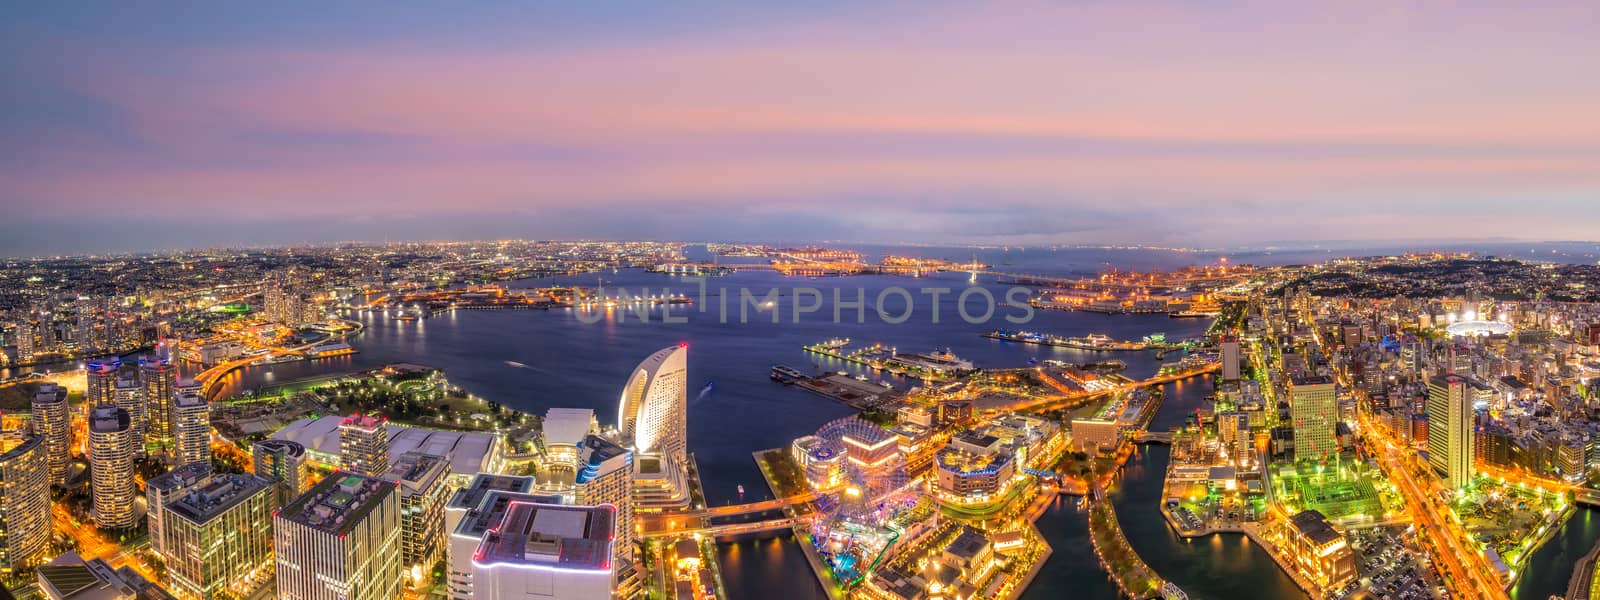 Yokohama city skyline from top view at sunset in Japan